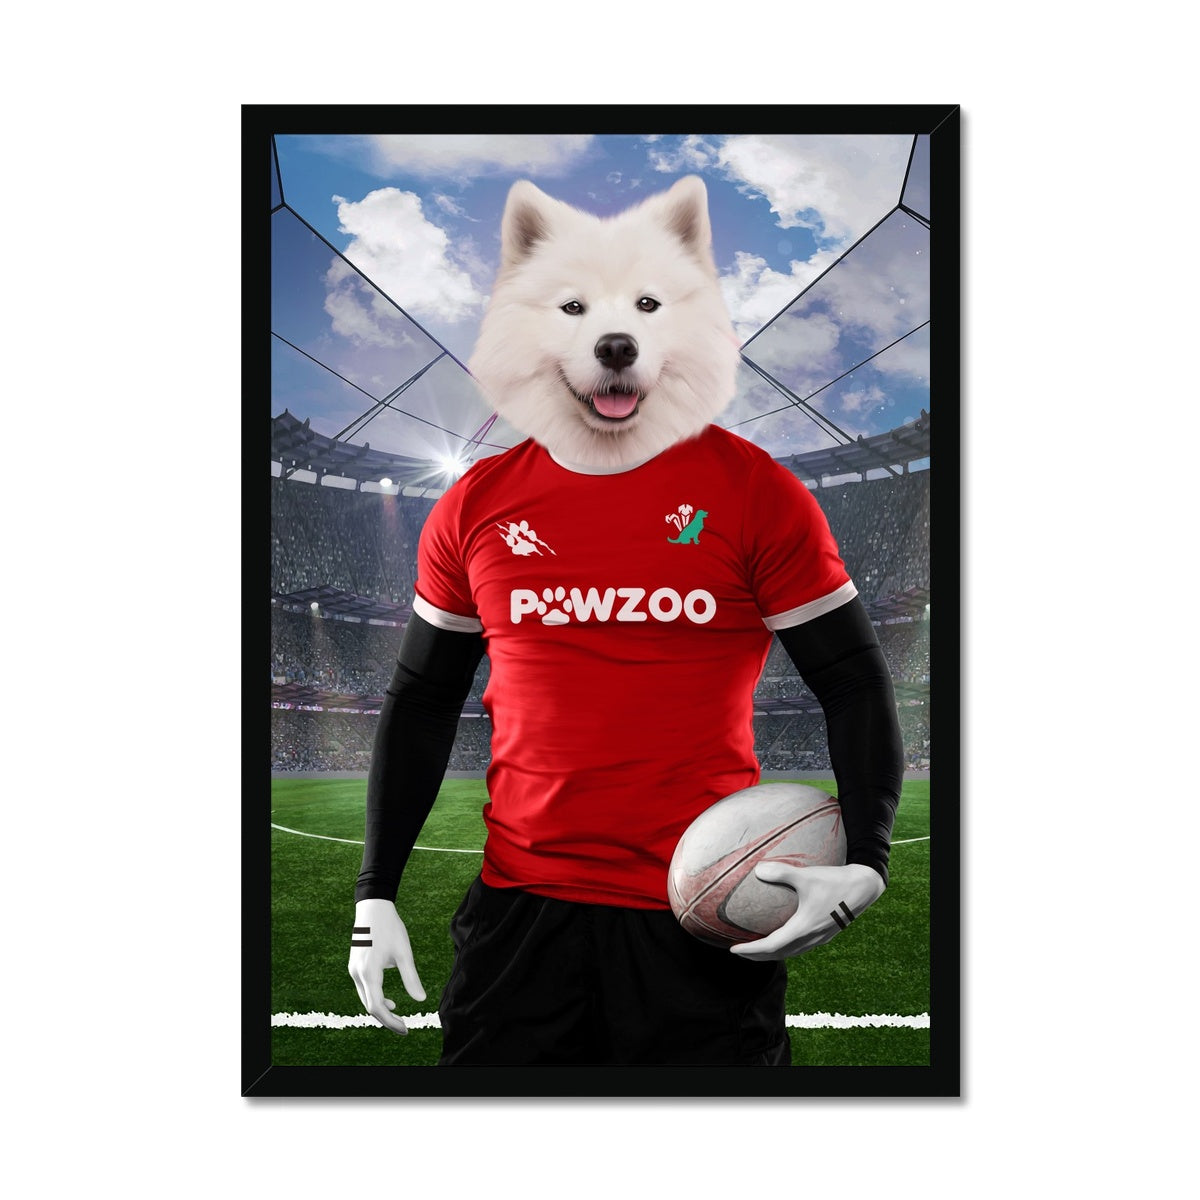 Wales Rugby Team: Paw & Glory, pawandglory, for pet portraits, dog portraits colorful, dog portrait images, paintings of pets from photos, the admiral dog portrait, the general portrait, pet portraits